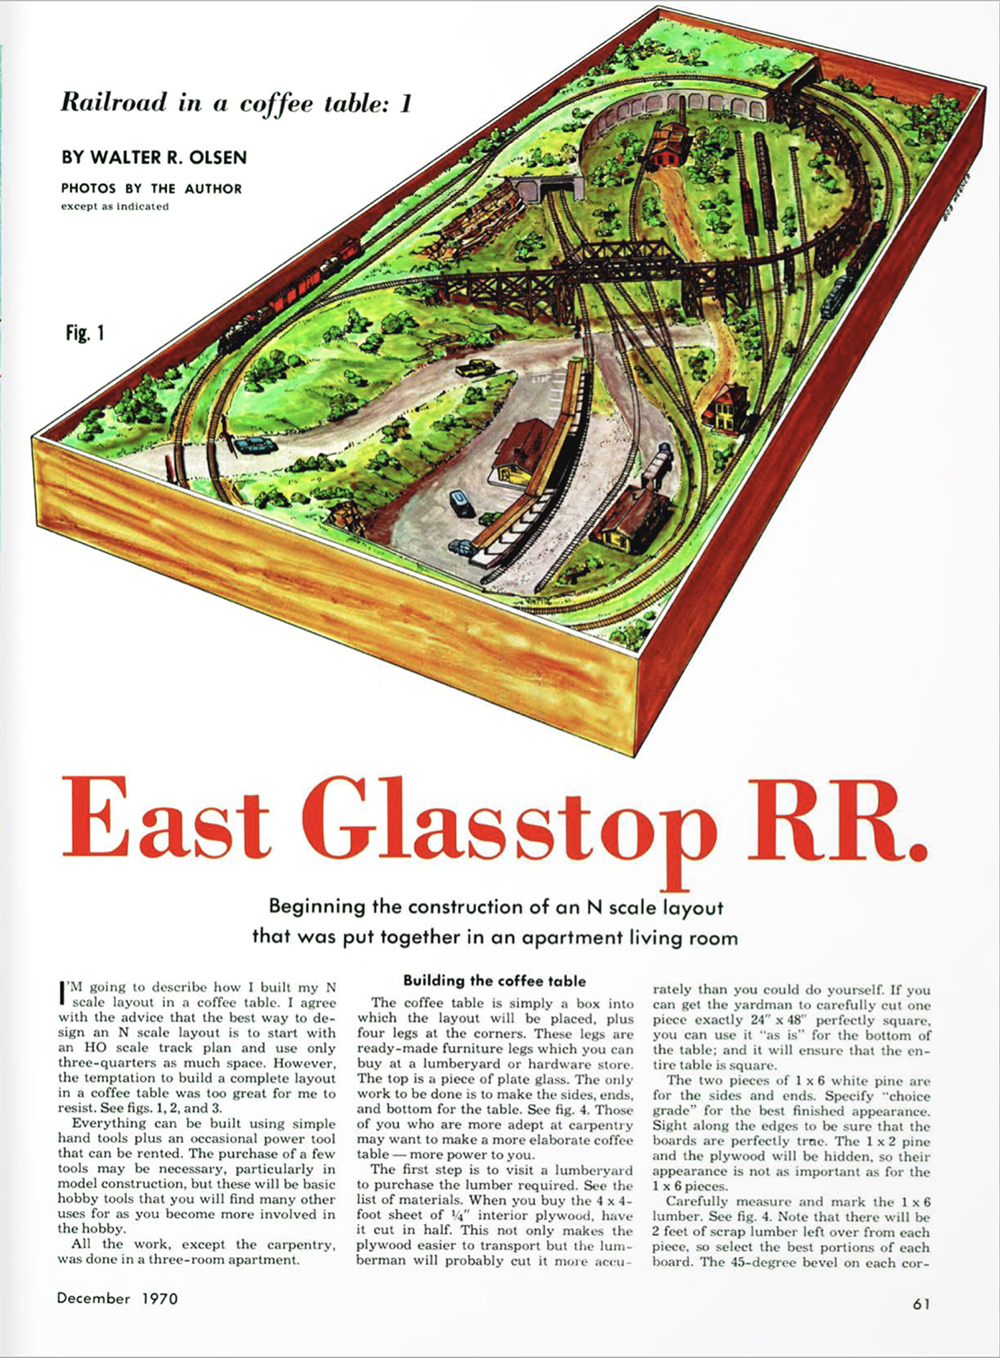 Magazine page layout showing color illustration, red headline letters, and blocks of body text on white page